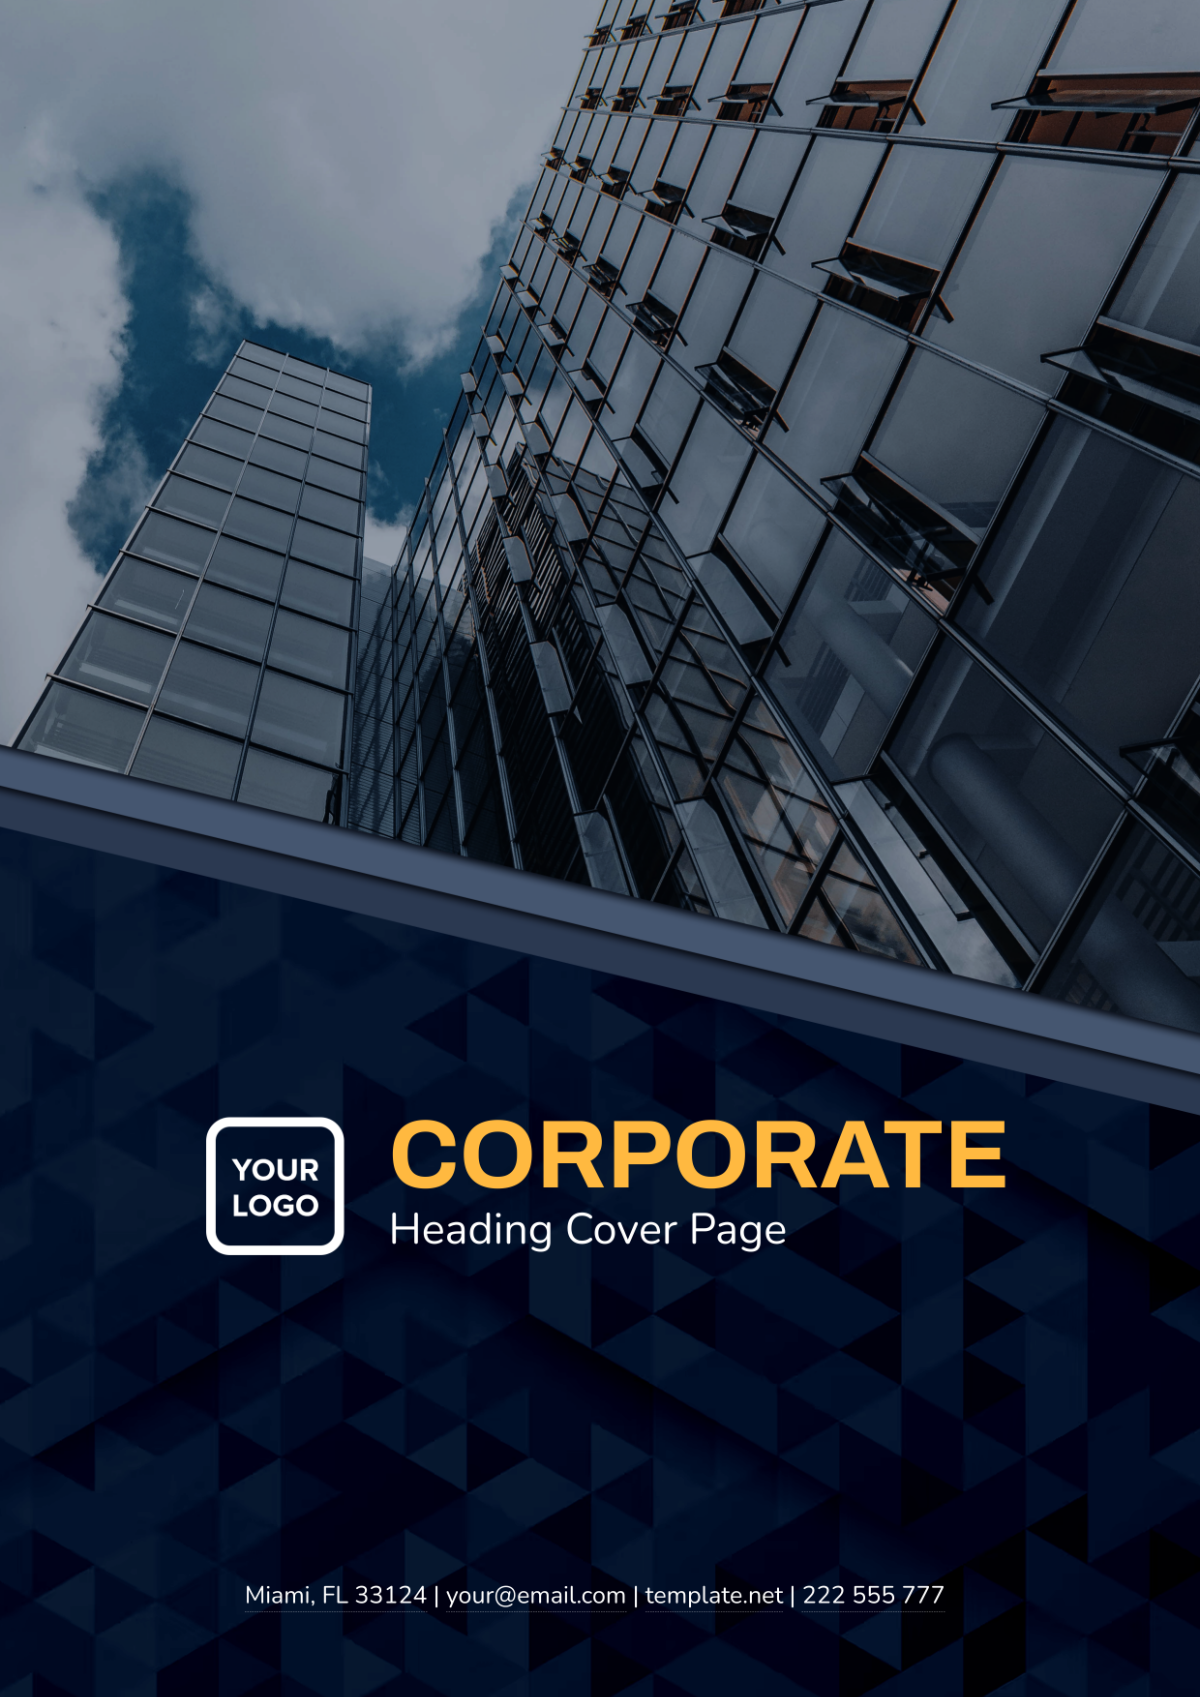 Corporate Heading Cover Page Template